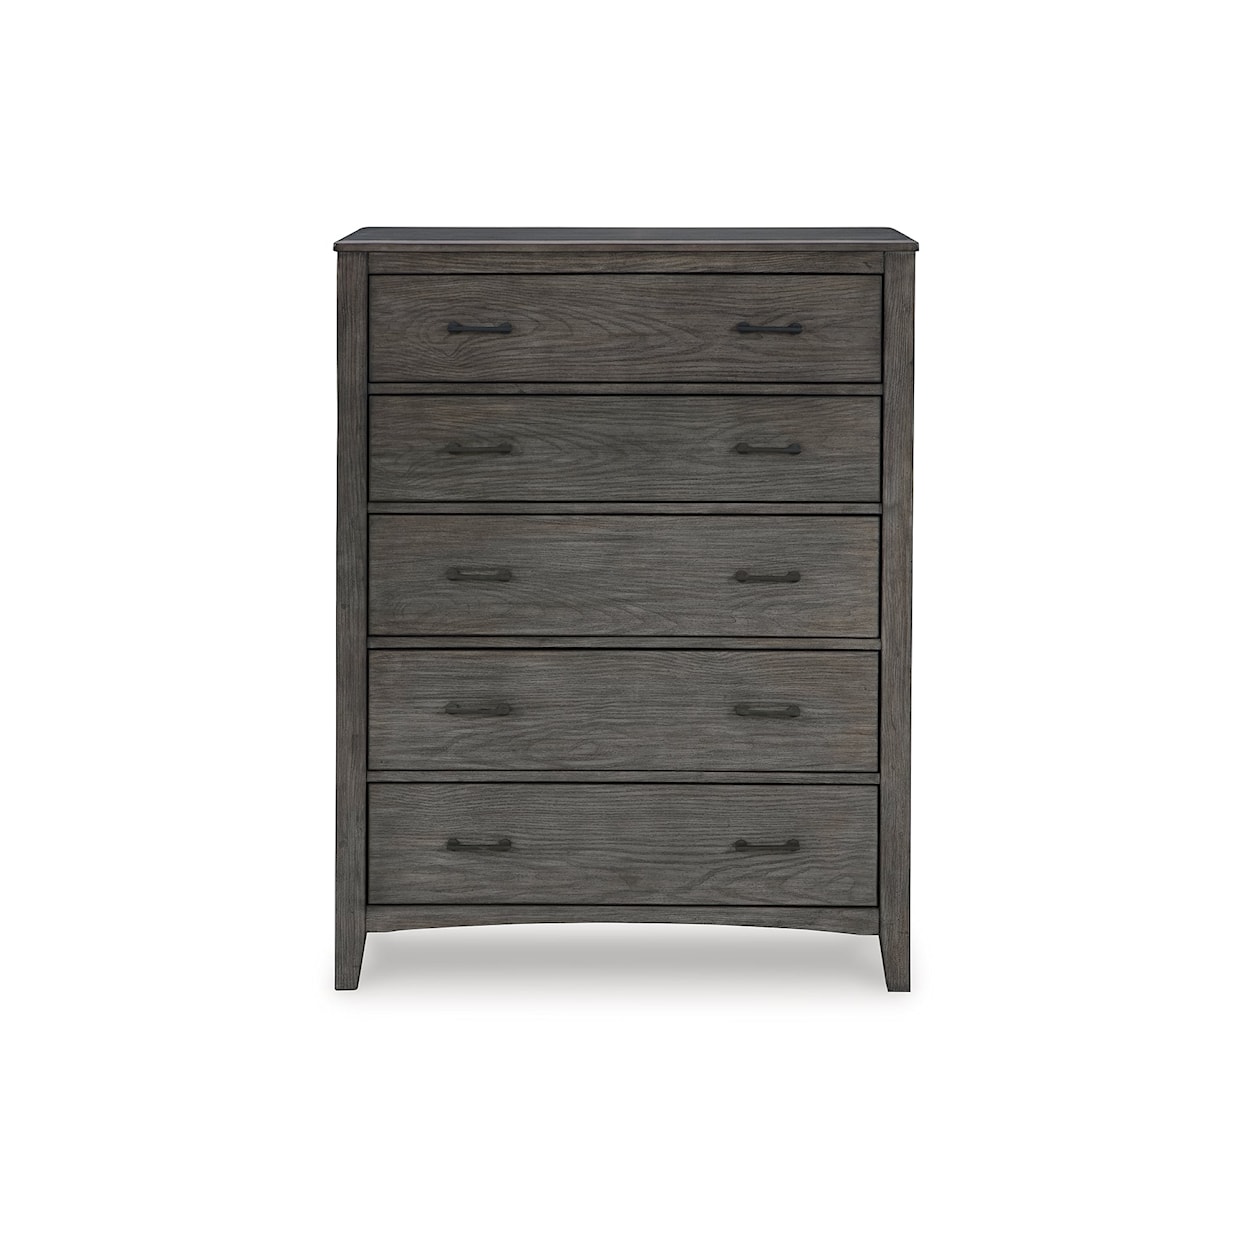 Signature Design by Ashley Montillan Chest of Drawers